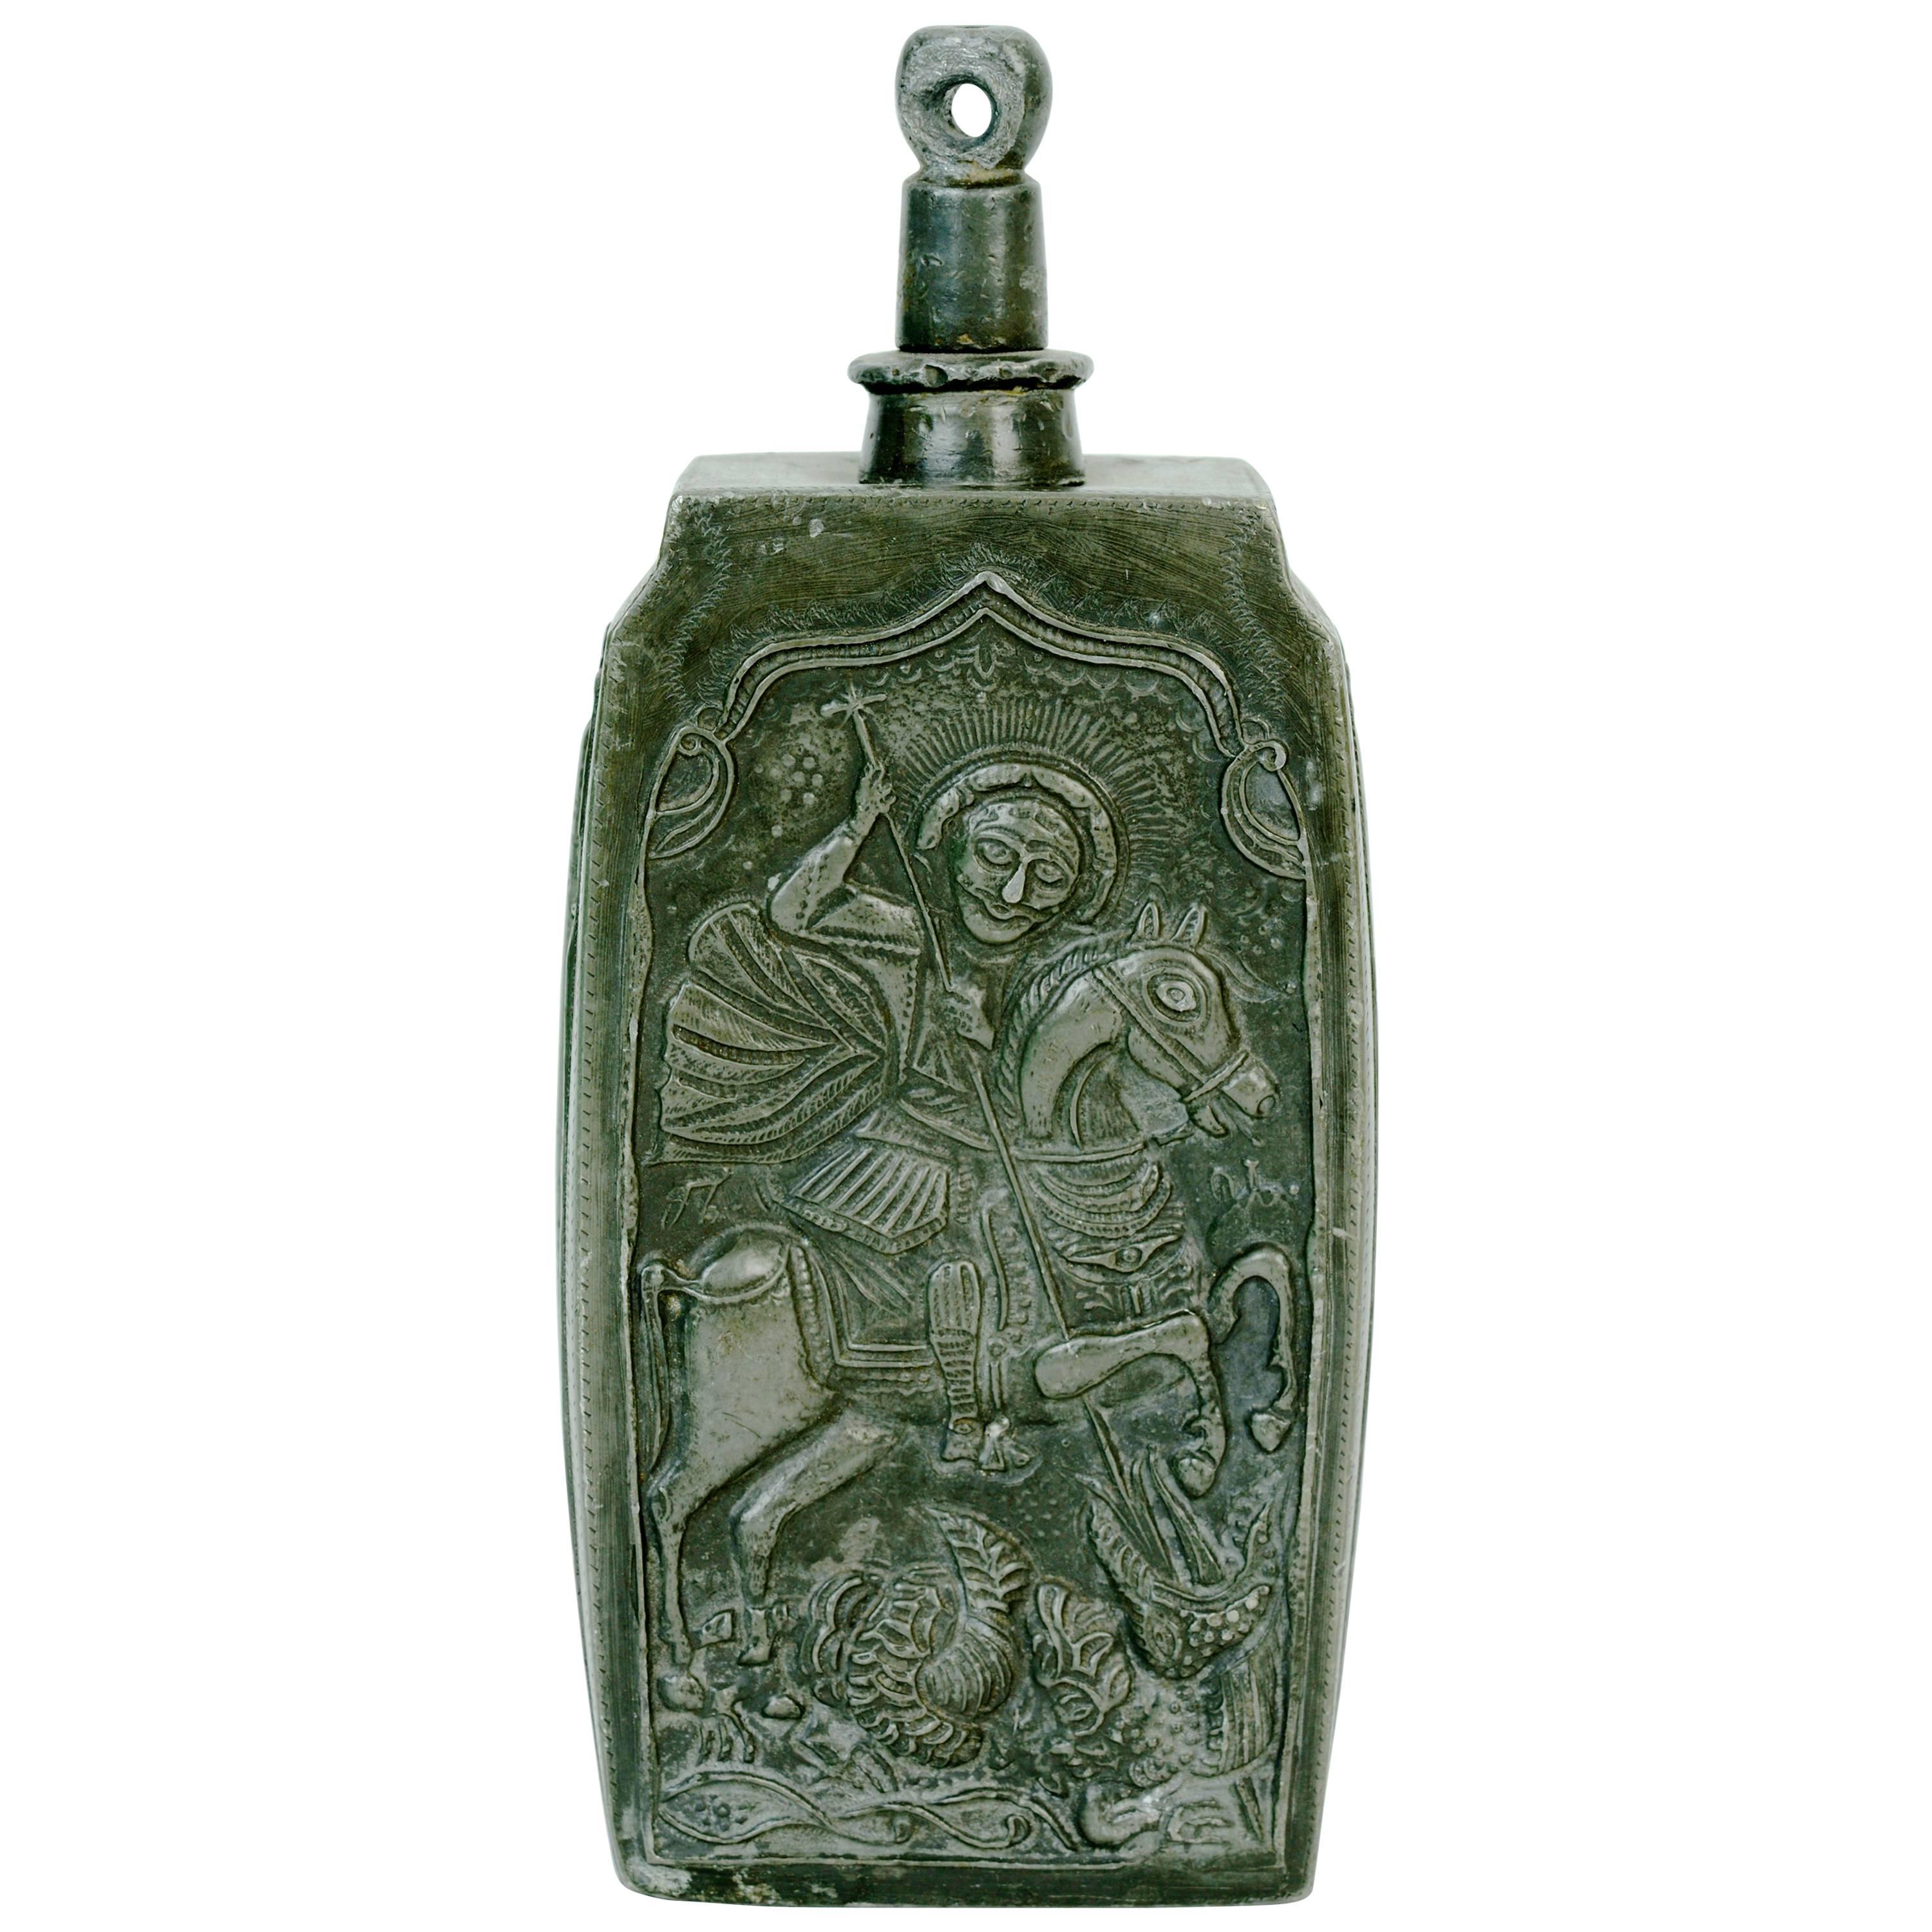 18th C Russian Pewter Powder Flask Embossed with St George Slaying a Dragon